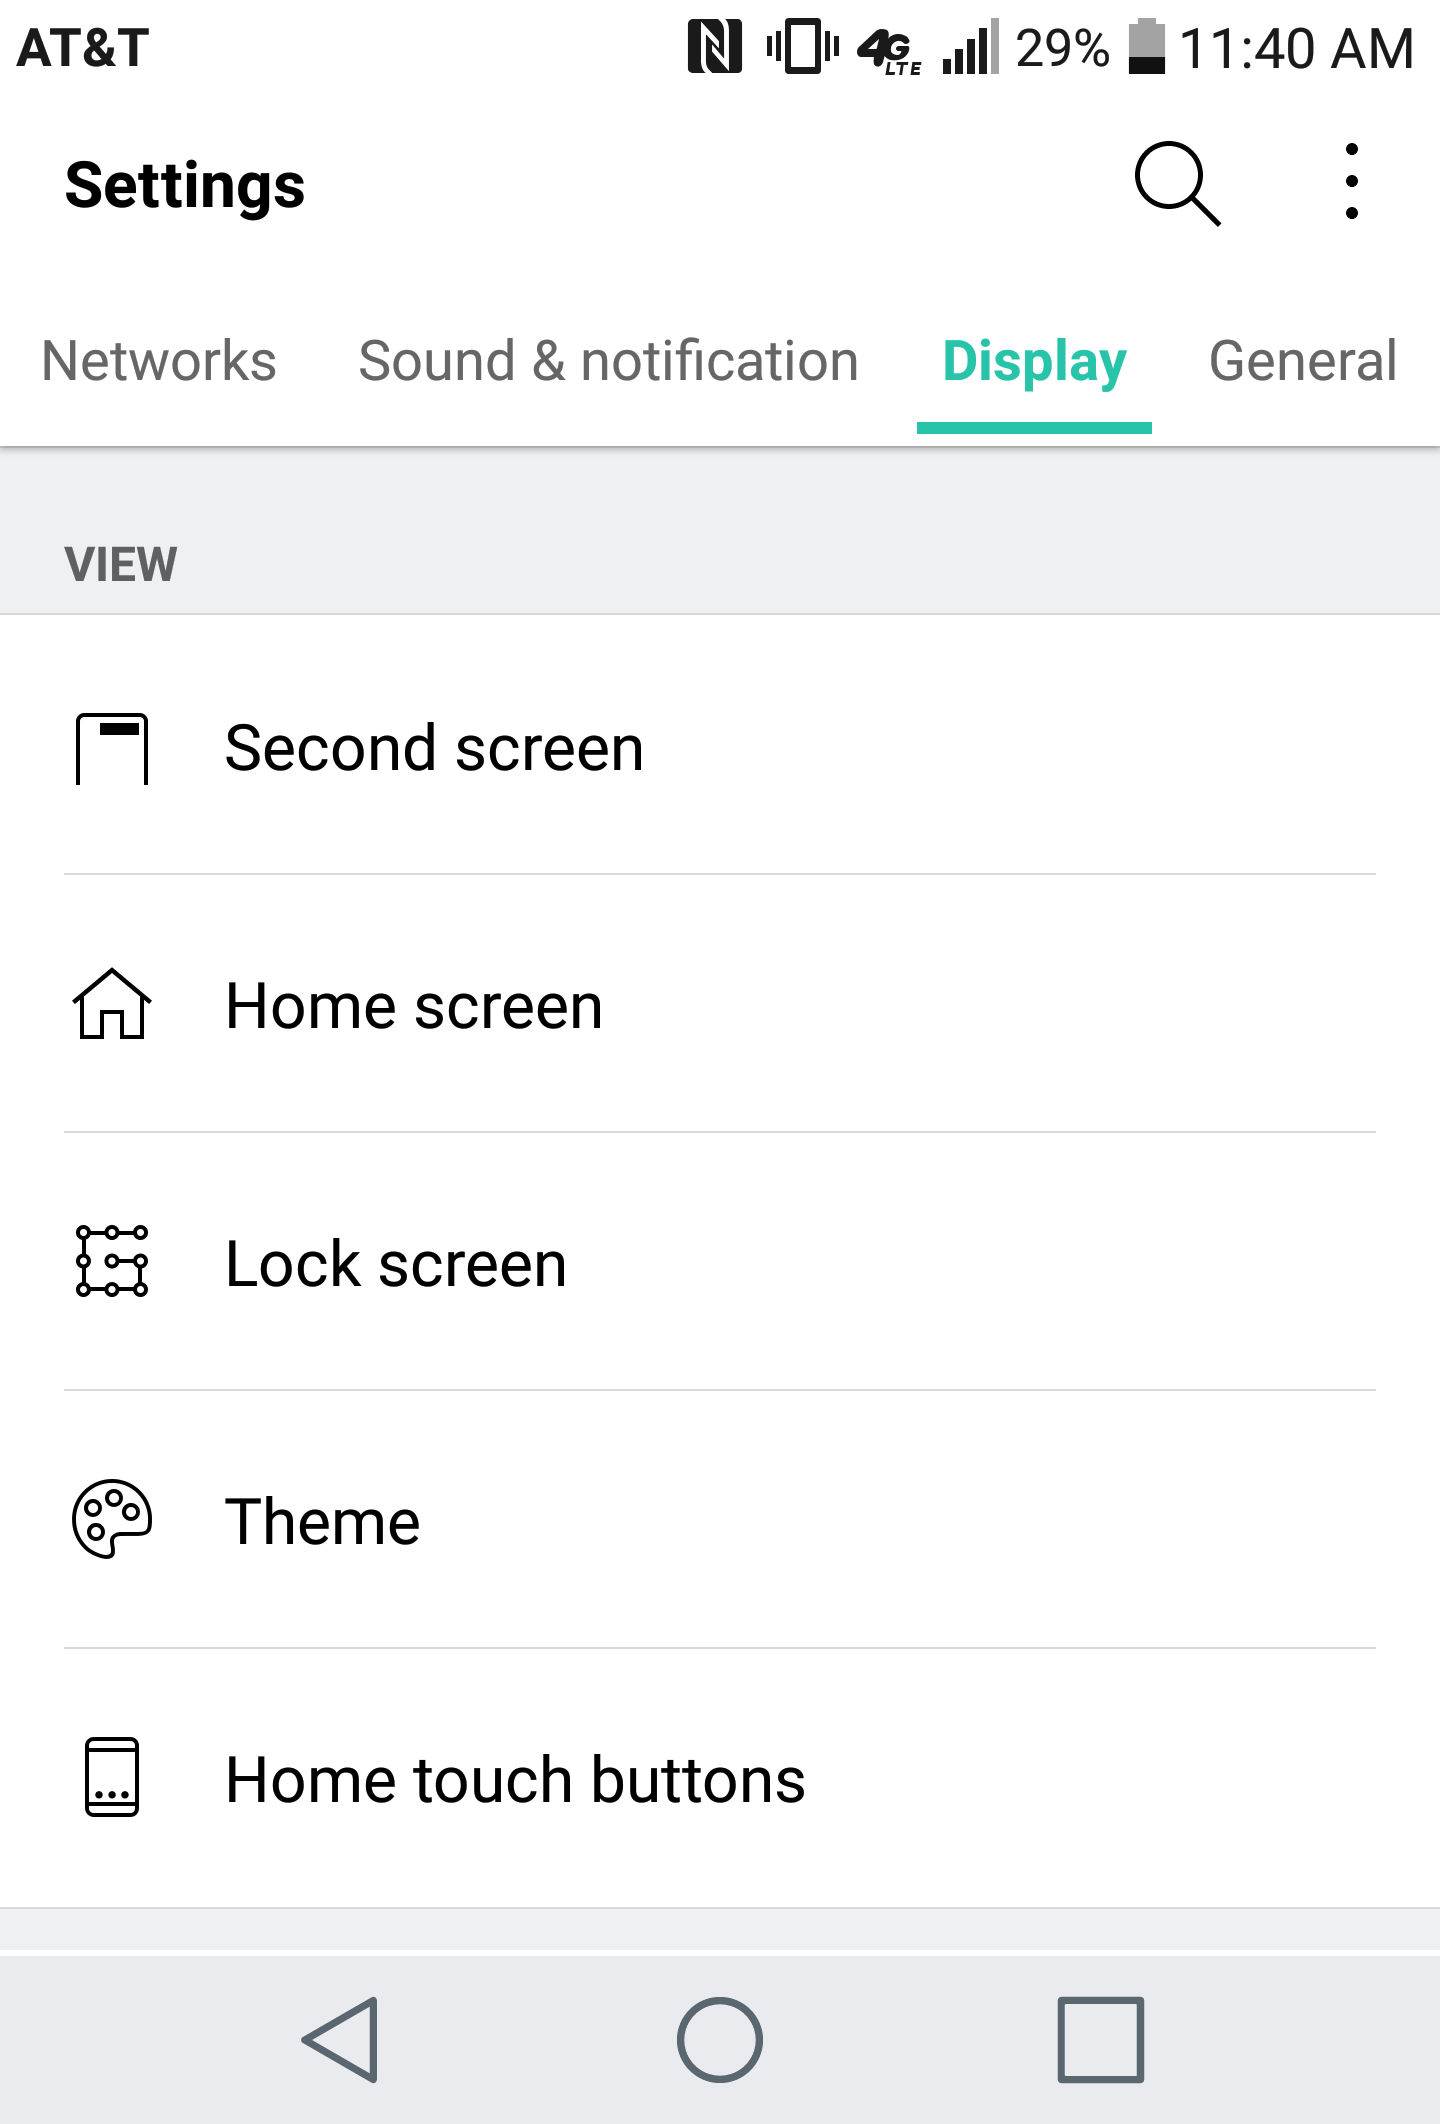 lg v20 android settings - second screen